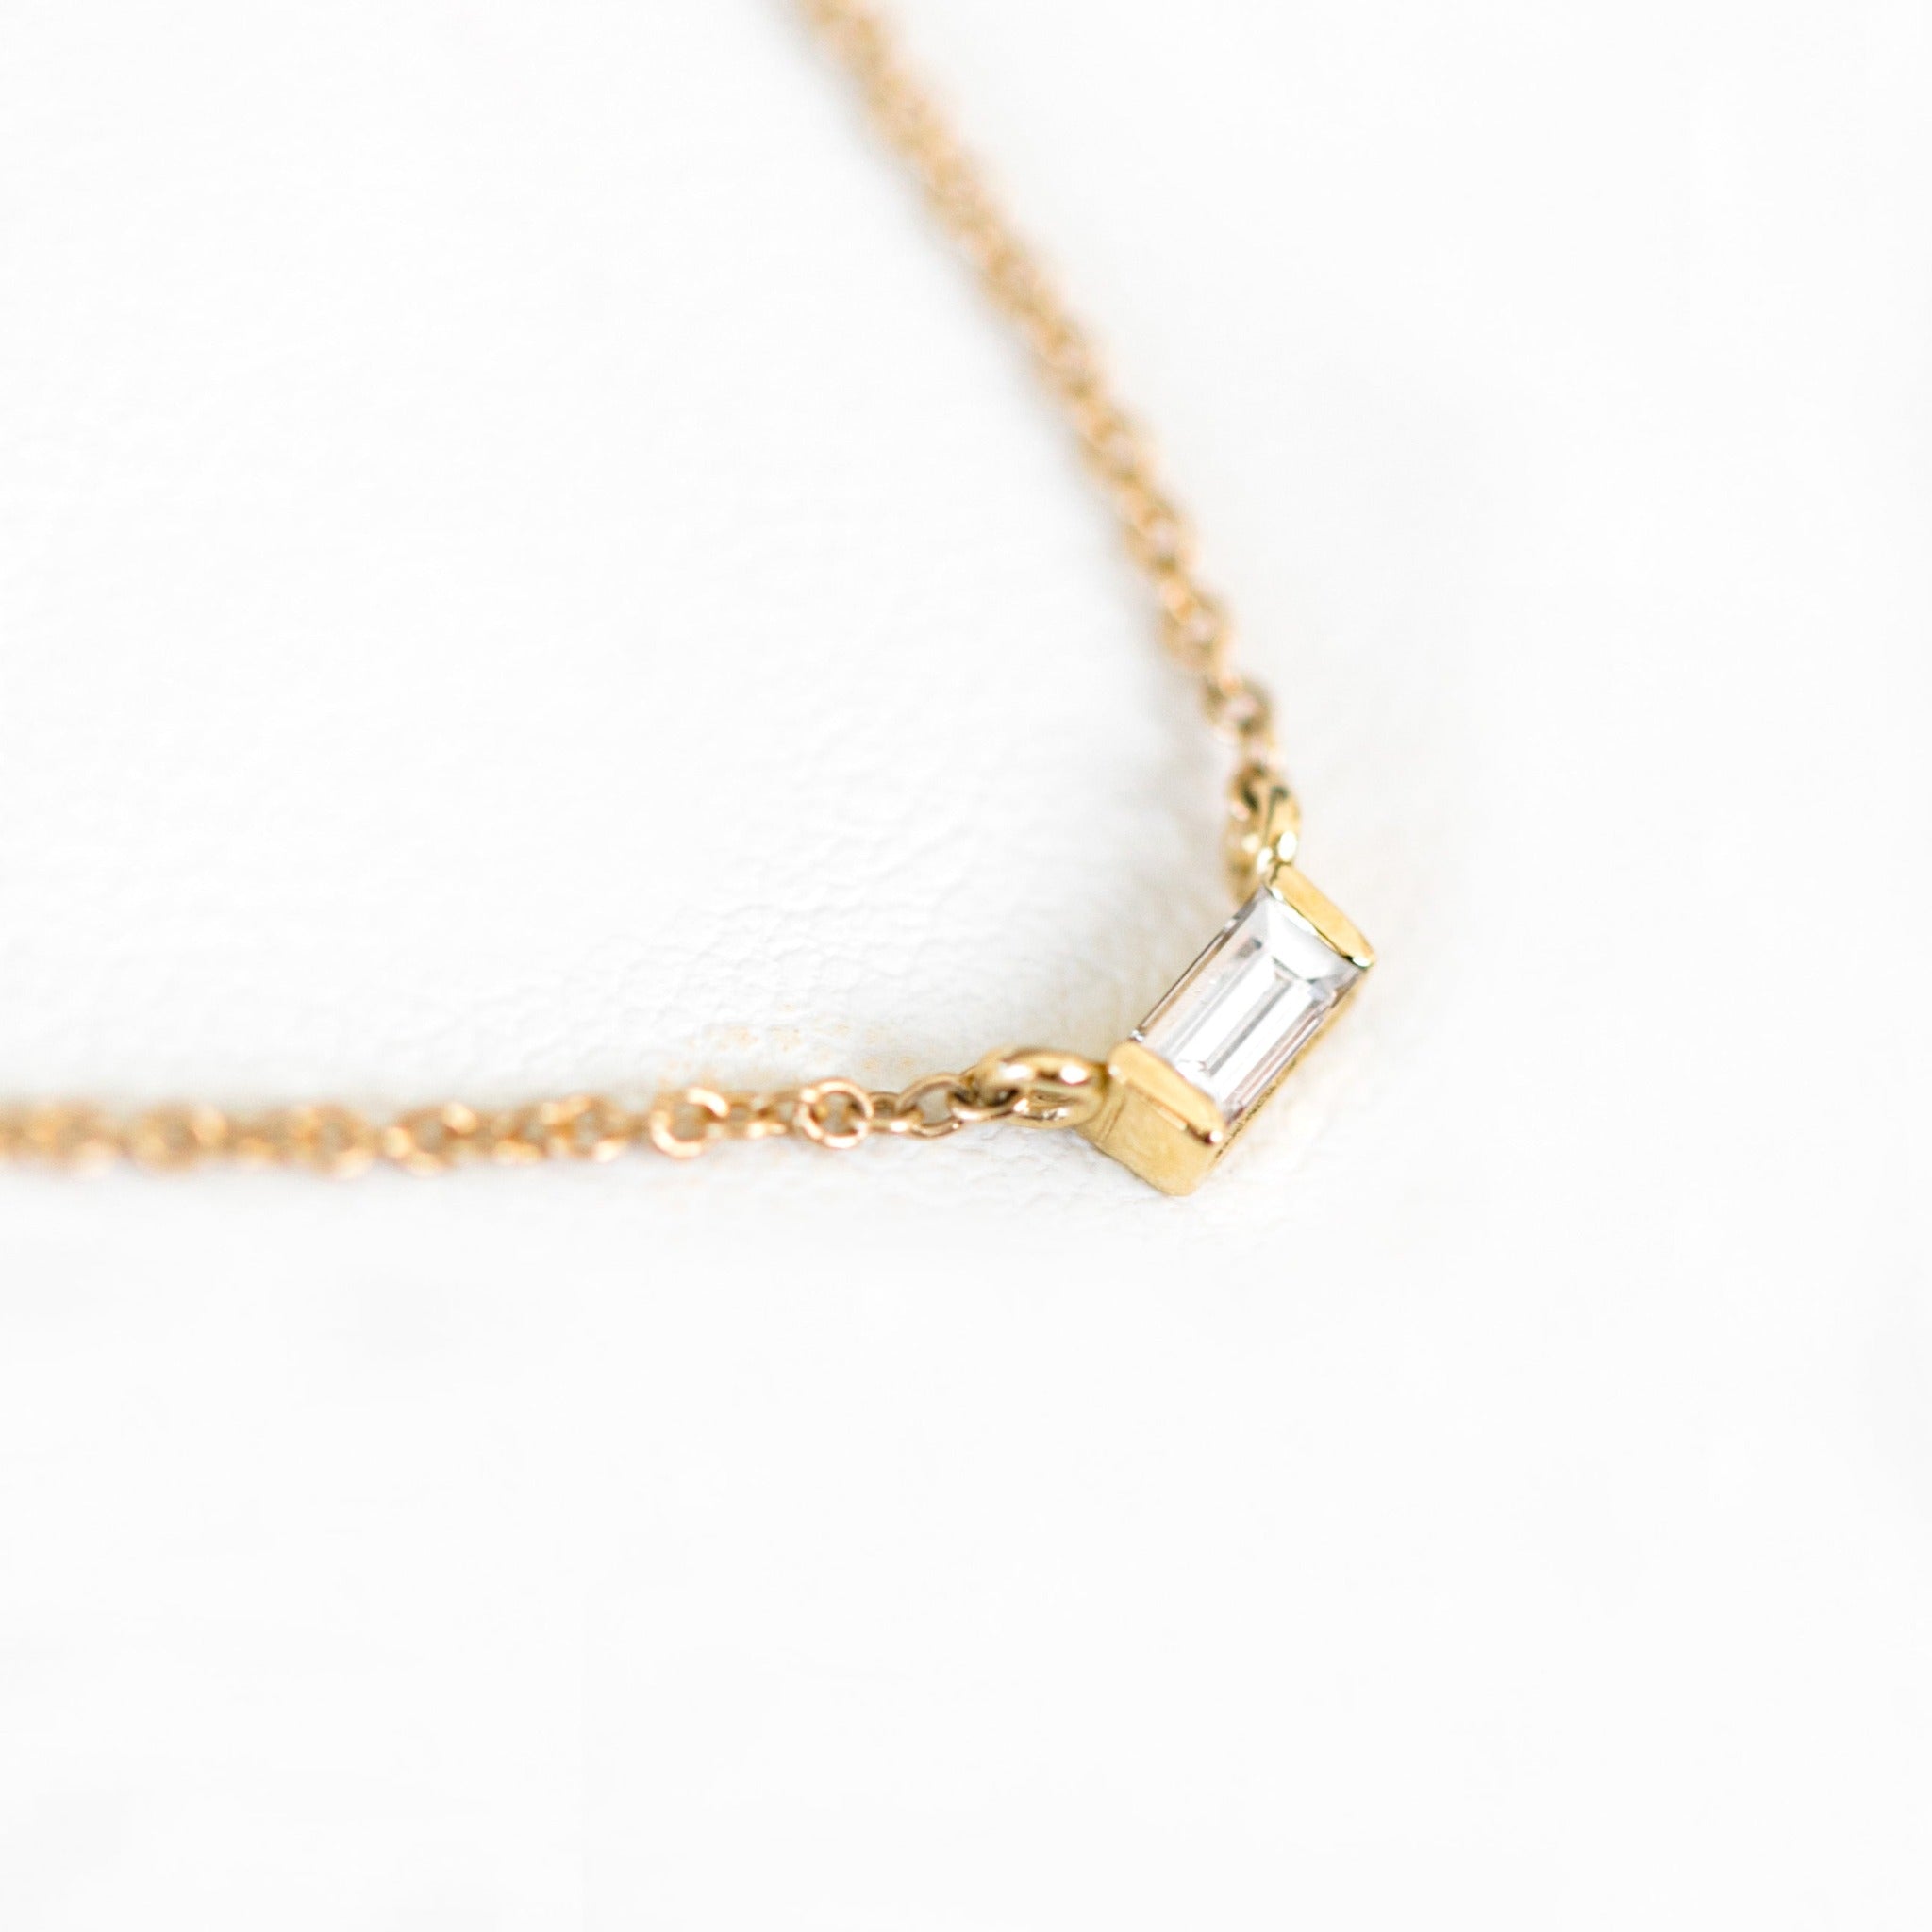 Step cut gemstone that is ethically sourced. Set on a 14k yellow gold chain.